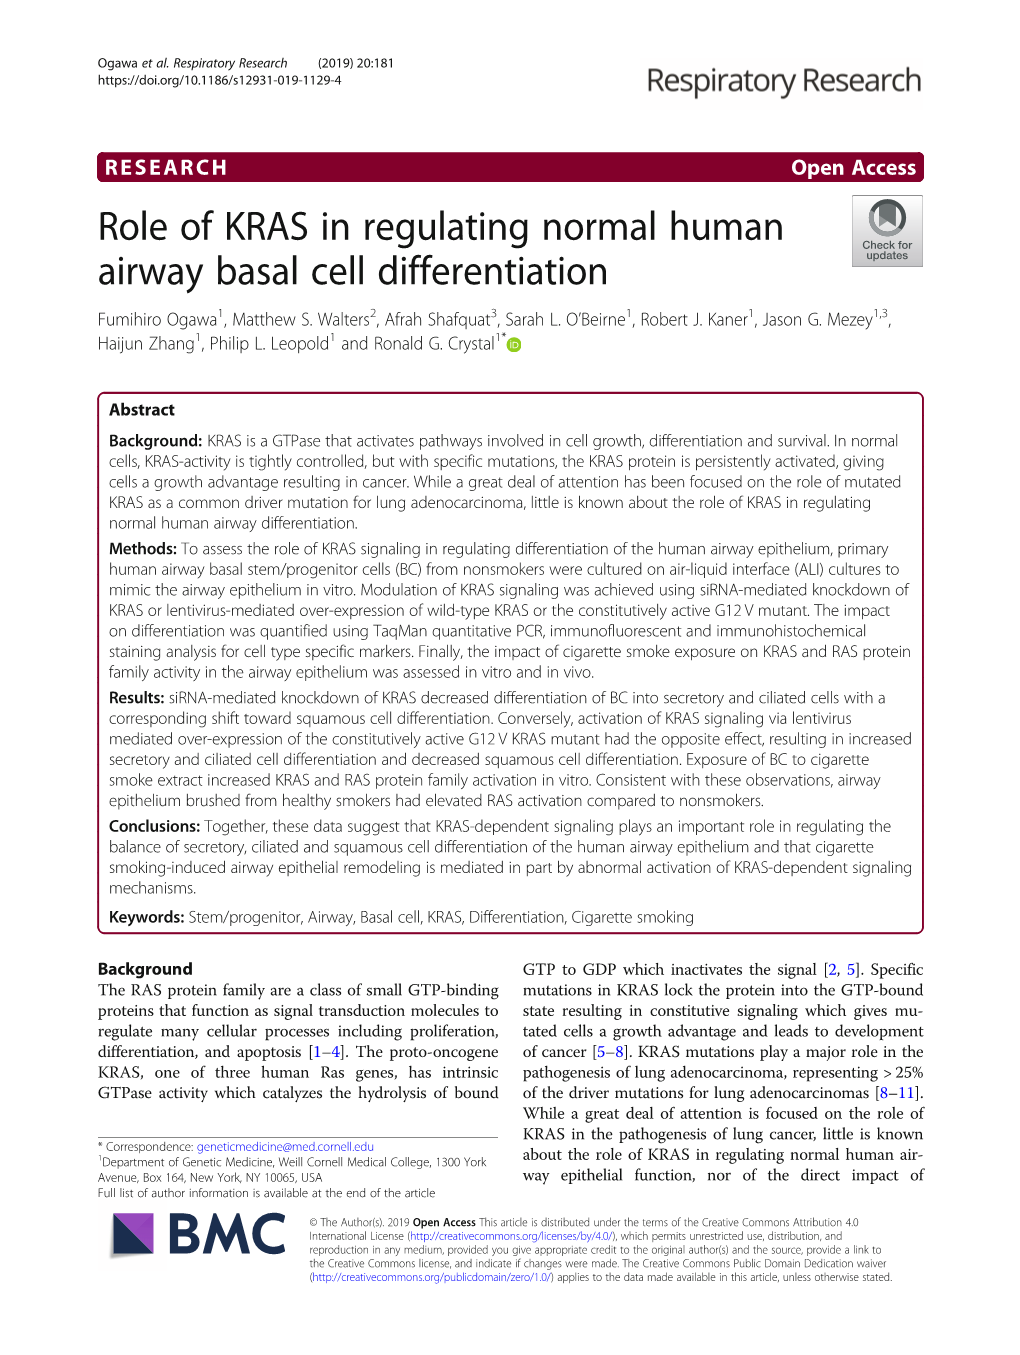 Role of KRAS in Regulating Normal Human Airway Basal Cell Differentiation Fumihiro Ogawa1, Matthew S